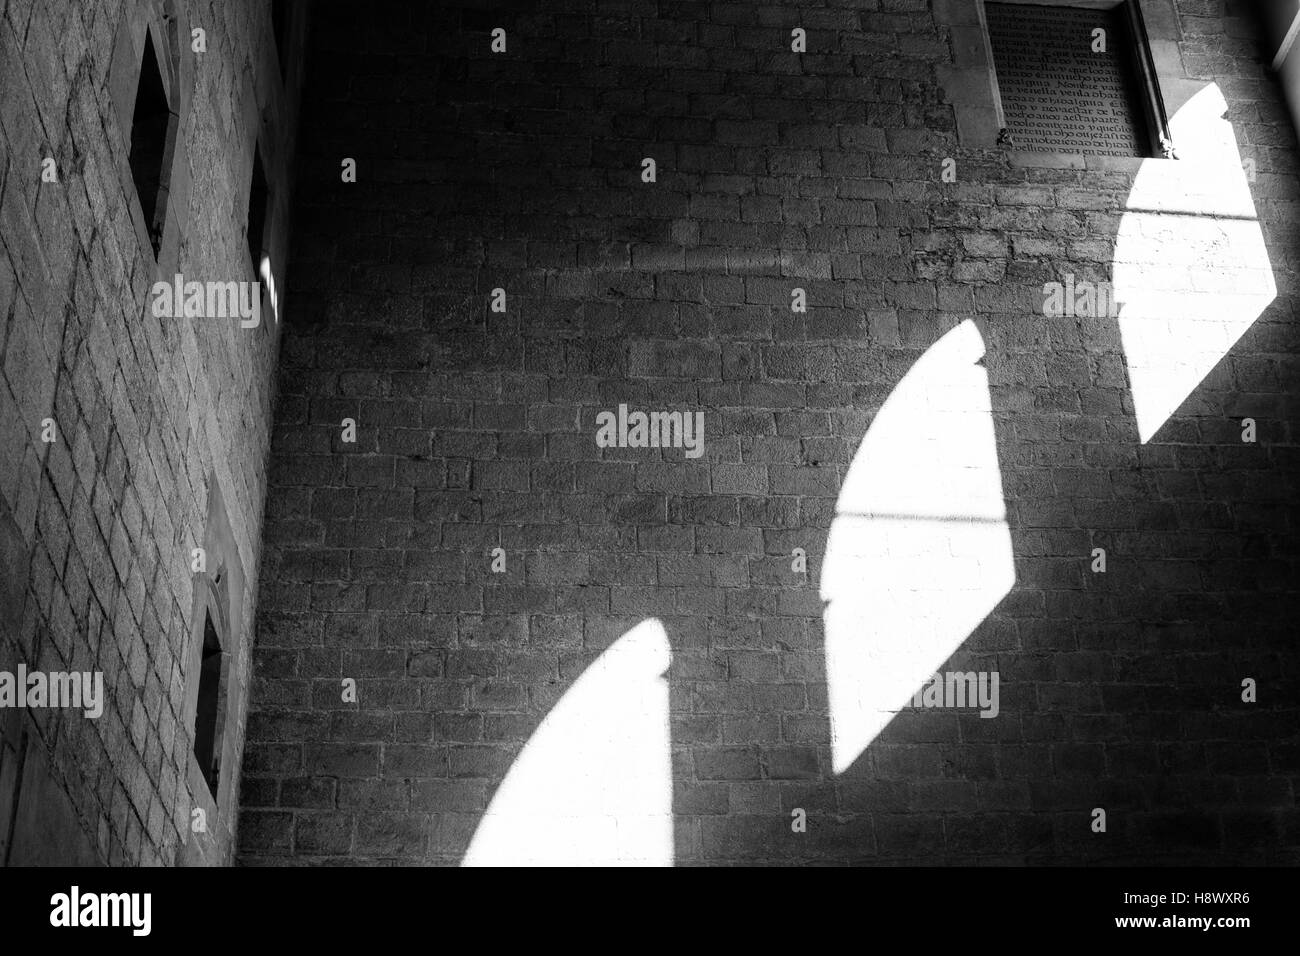 Black and white stone wall with sunlight coming through three windows. Stock Photo